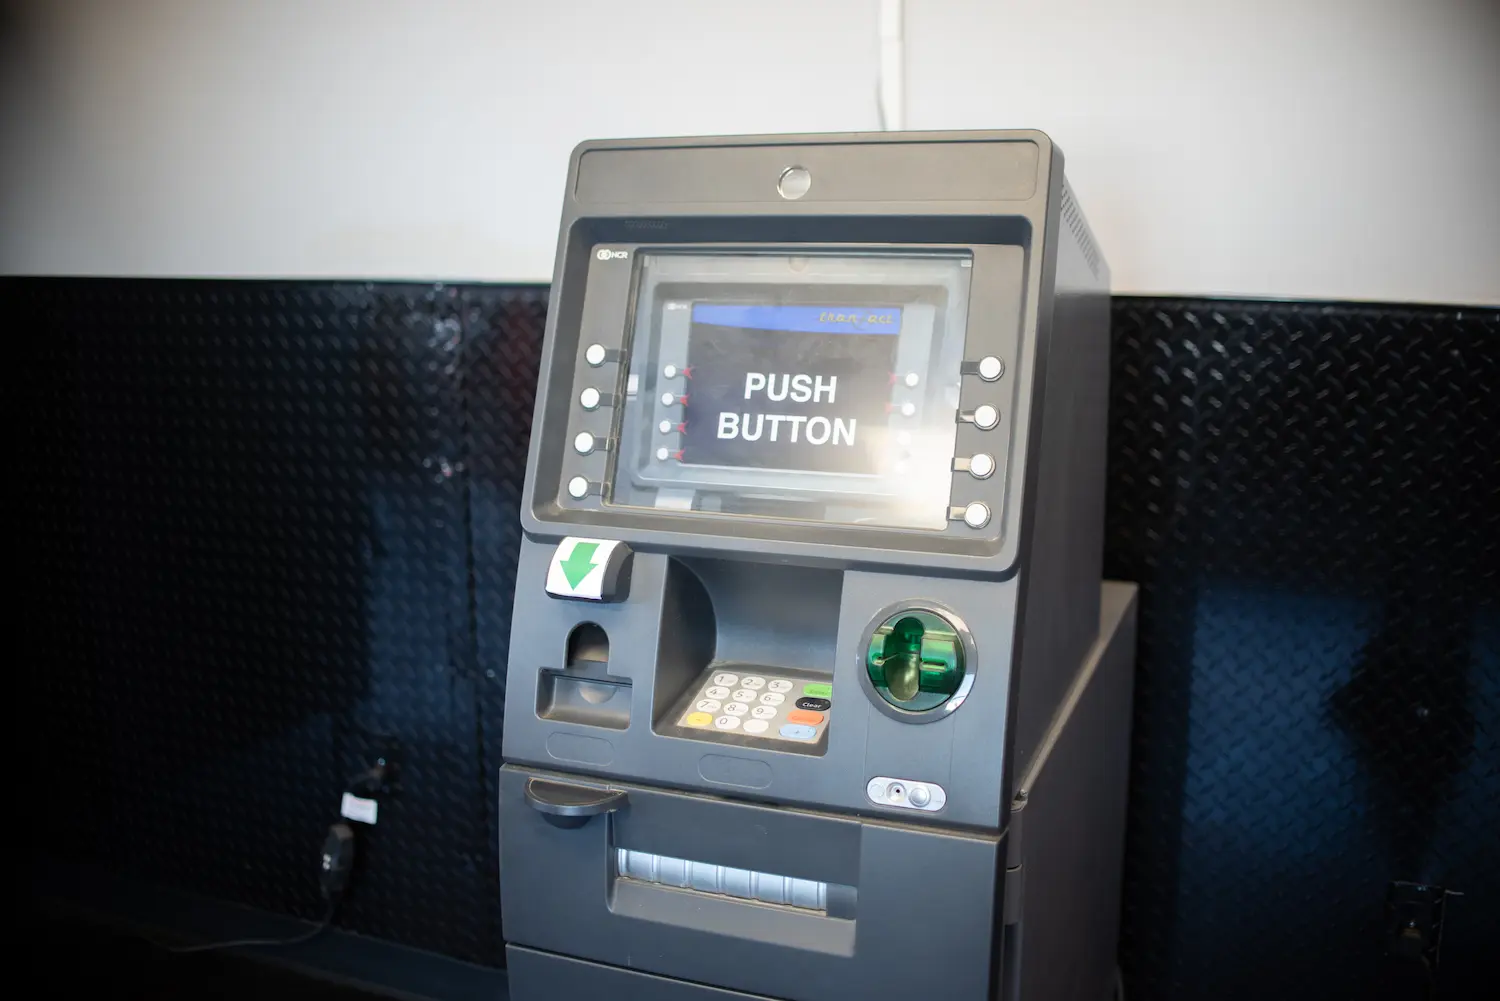 ATM Machine displaying message reading Push Button